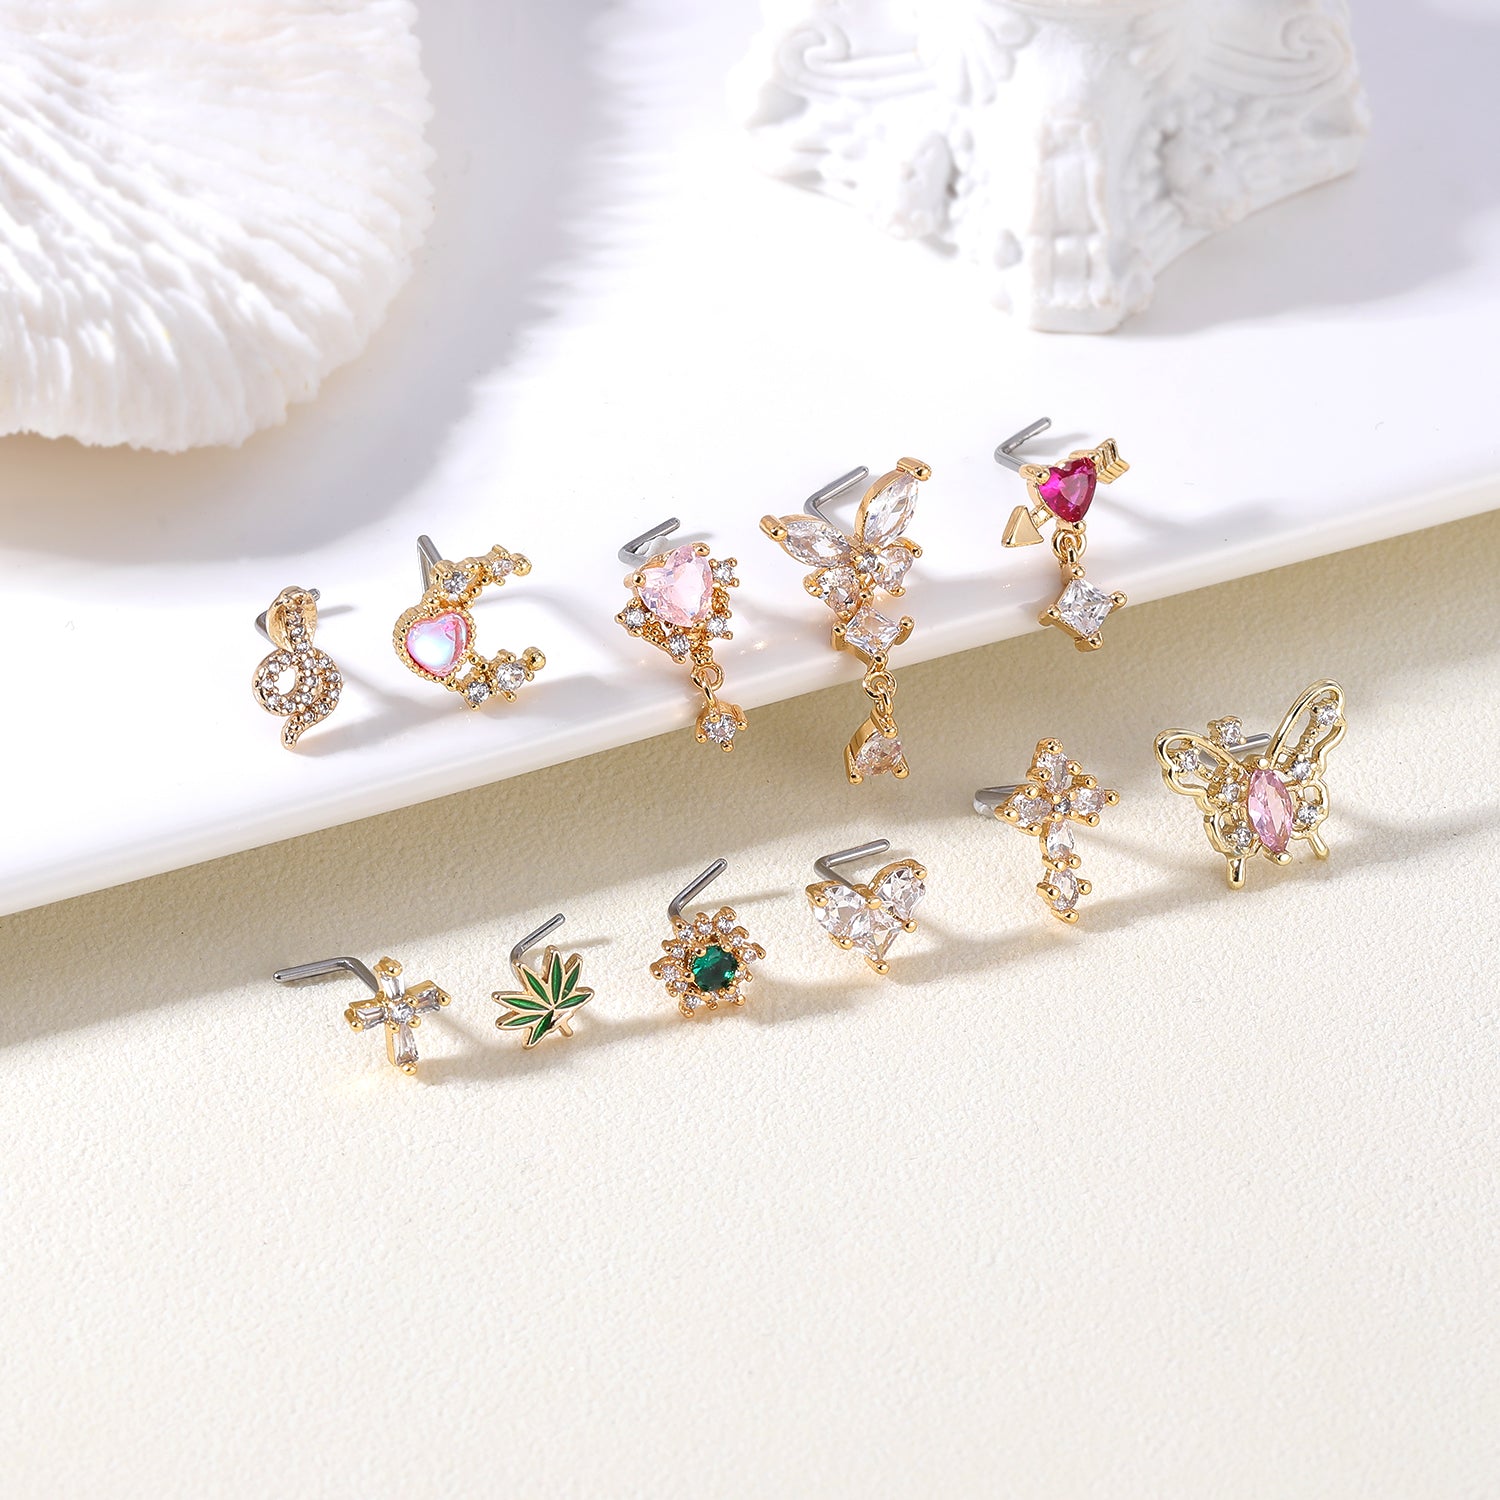 20G-Heart-White-Zircon-Nose-Studs-Piercing-L-Shape-Nose-Rings-Gold-Silver-Plated-Nostril-Piercing